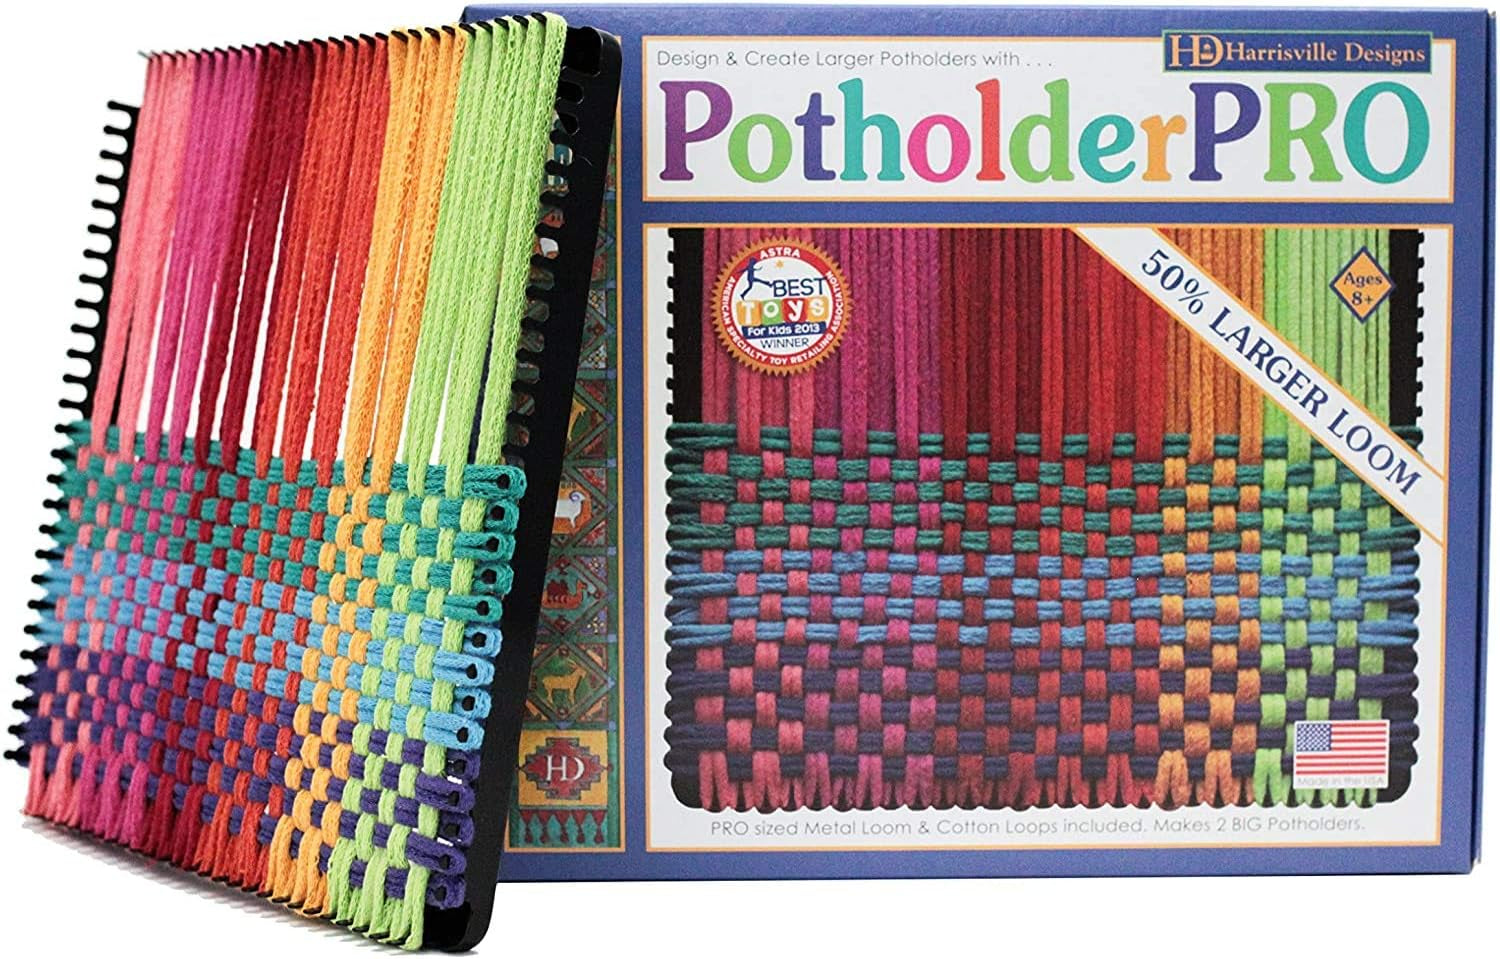 Friendly Loom 10" PRO Size Black Potholder Metal Loom Kit with Bright Rainbow Color Cotton Loops to Make 2 Potholders, Weaving Crafts for Kids & Adults MADE in the USA by